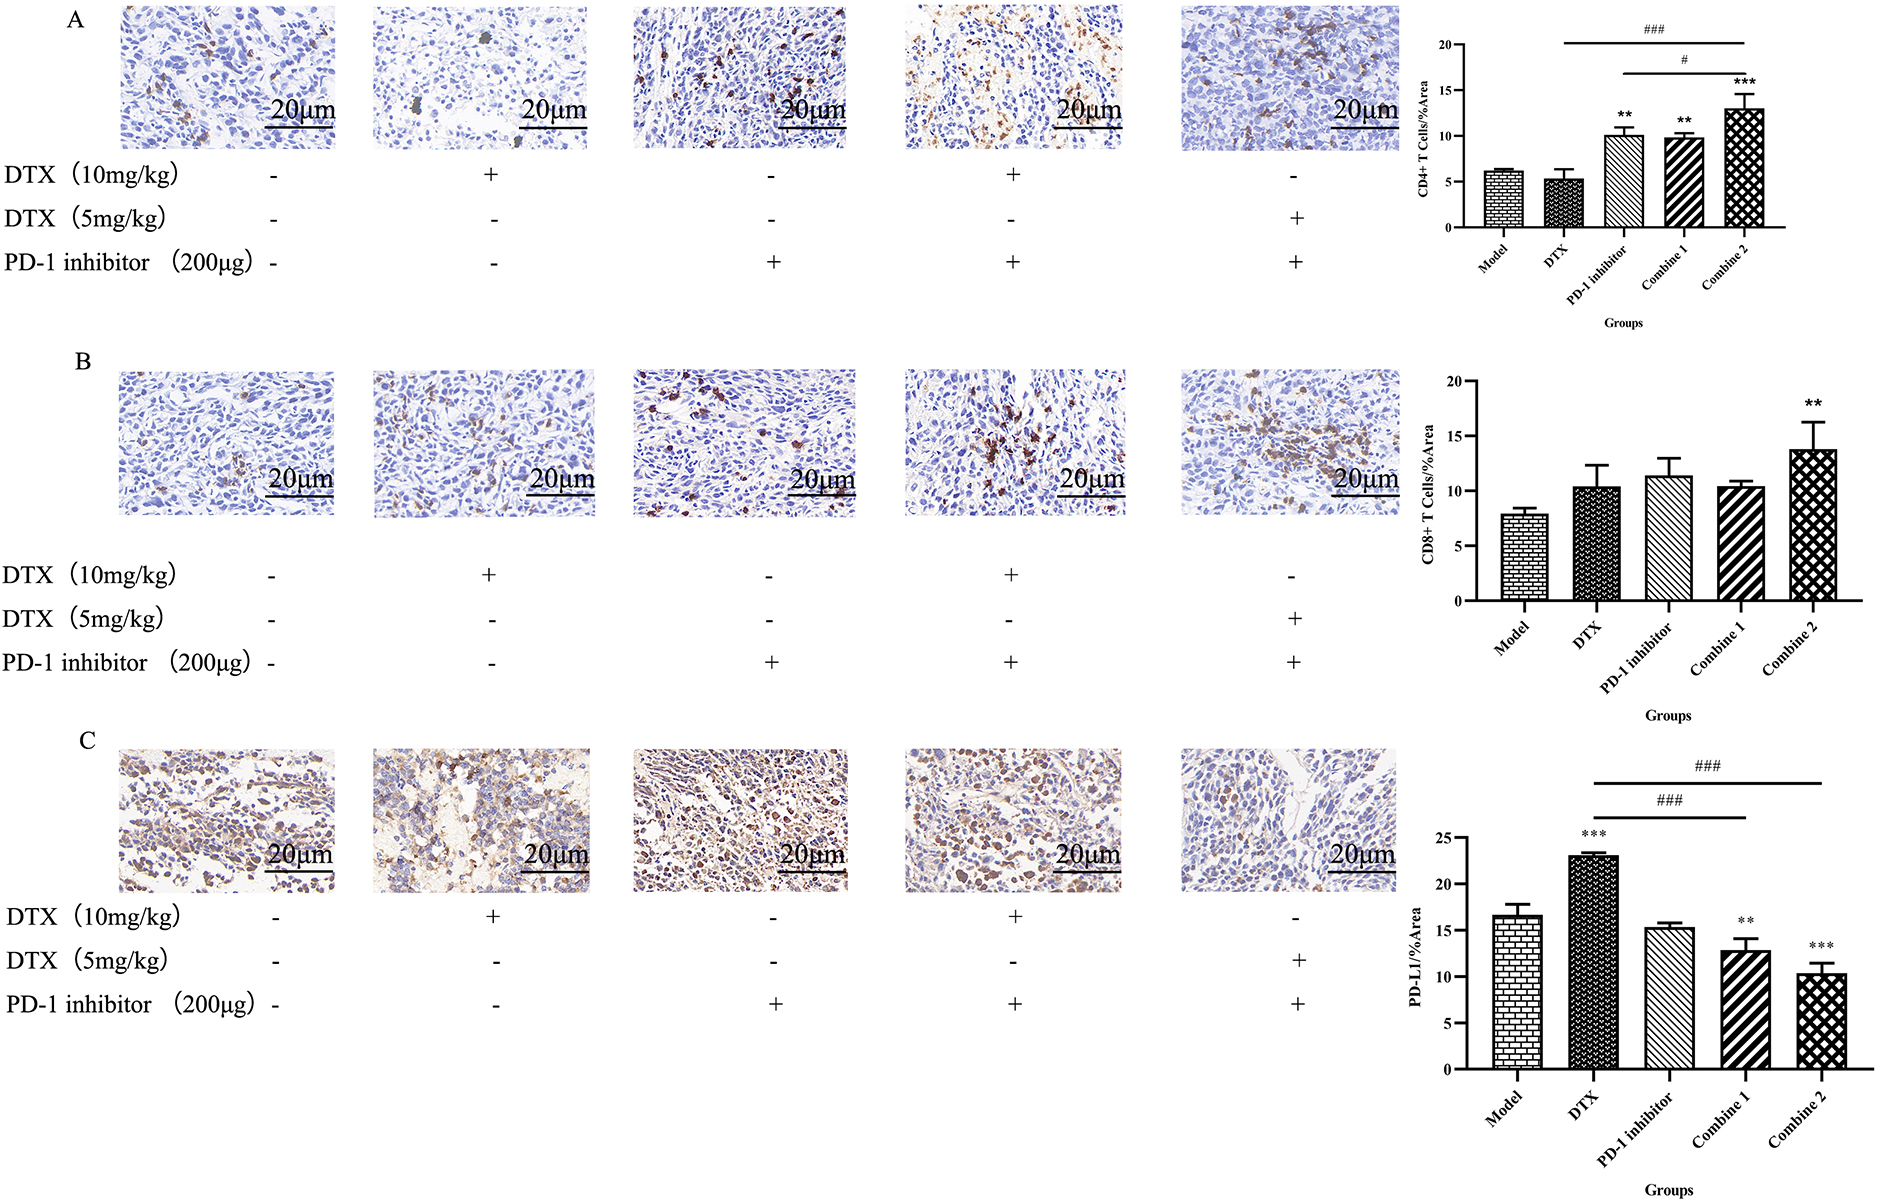 PD-l inhibitor combined with Docetaxel decreased tumor PD-LI expression and increases tumor-infiltrating CD4+ and CD8+T cells. (A) Tumors were harvested after mice being sacrificed and then fixed with 4% paraformaldehyde for 24 hours.The fixed tissues wereembedded in paraffin and cut into 4um thin sections on a paraffin microtomefor immunohistochemical experiments.After dewaxing, antigen repair, blocking endogenous peroxidase, serum sealing and PD-L1 antibody incubaticn, DAB chromogenic reaction, nucleus counterstaining, dehydration and moounting were performed. The prepared sections were examined under the microscope, and images were collected and analyzed by Image J.All the data were presented as means ± SD (n= 3). **P< 0.01; ***P< 0.001 (versus Model group, One-way ANOVA test followedby Tukey’s multiple comparisons test. (B) Following the procedure described above, CD4 antibodies were added during antibody incubation.The prepared sections were examined under the microscope, and images were collected and aralyzed by Image J. All the data were presented as means ± SD (n= 3). **P< 0.01; ***P< 0.001 (versus Model group, One-way ANOVA test followed by Tukey’s multiple comparisons test). #P< 0.05;###P< 0.01(versus Combine 2 group, One-way ANOVA test followed by Tukey’s multiple comparisons test). (C) Following the procedure described above, CD8 antibodies weree added during antibody incubation. The prepared sections were examined ulnder the microscope, and images were collected and analyzed by Image J. All the data were presented as means ± SD (n= 3). **P< 0.01(versus Model group, One-way ANOVA test followed by Tukey’s multiple comparisons test).